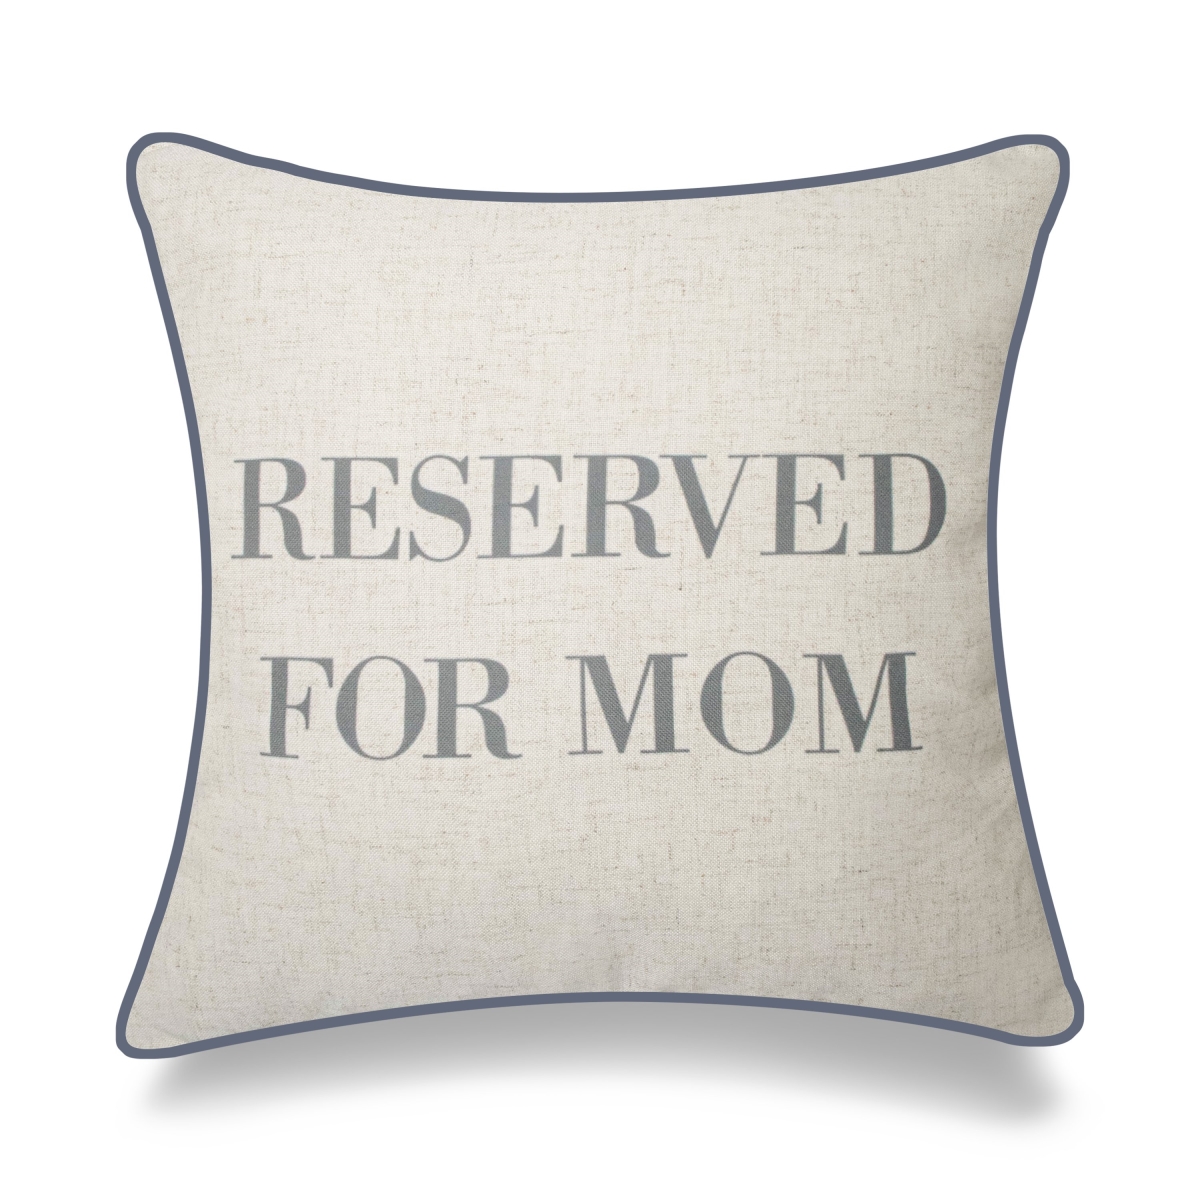 Picture of HUI Home HH-YM1818ICMMOP 18 x 18 in. Silver Reserved for Mom Pillow with Polyester Insert